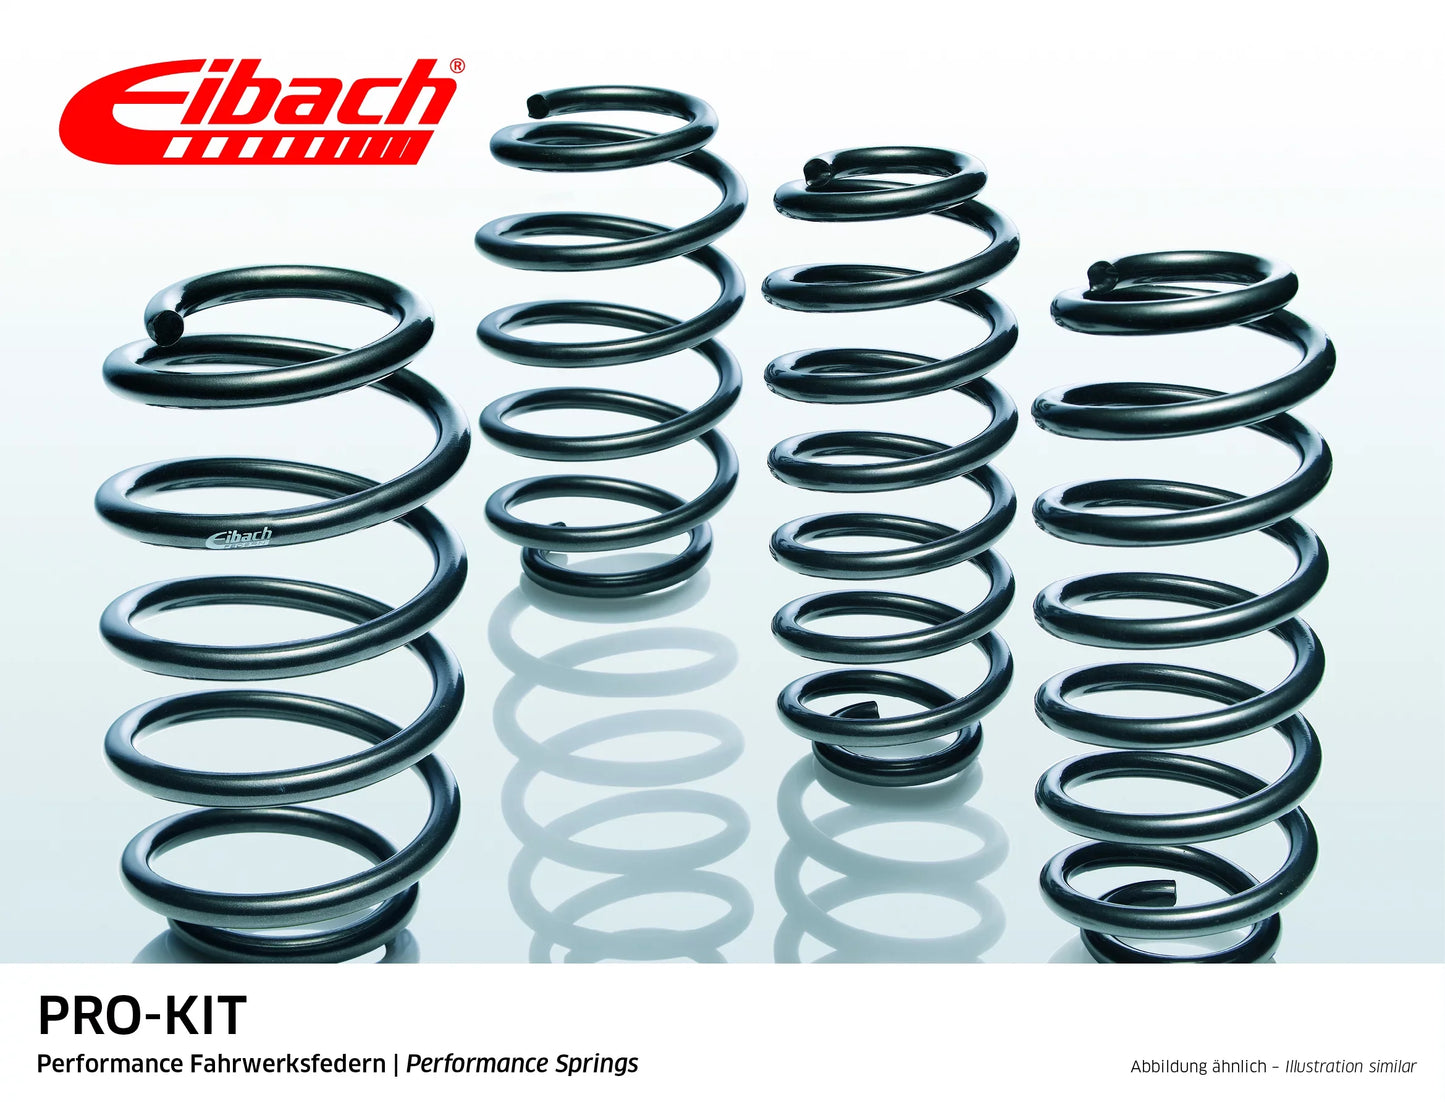 Eibach Pro-Kit Lowering Springs (E2021-321) at £460.95